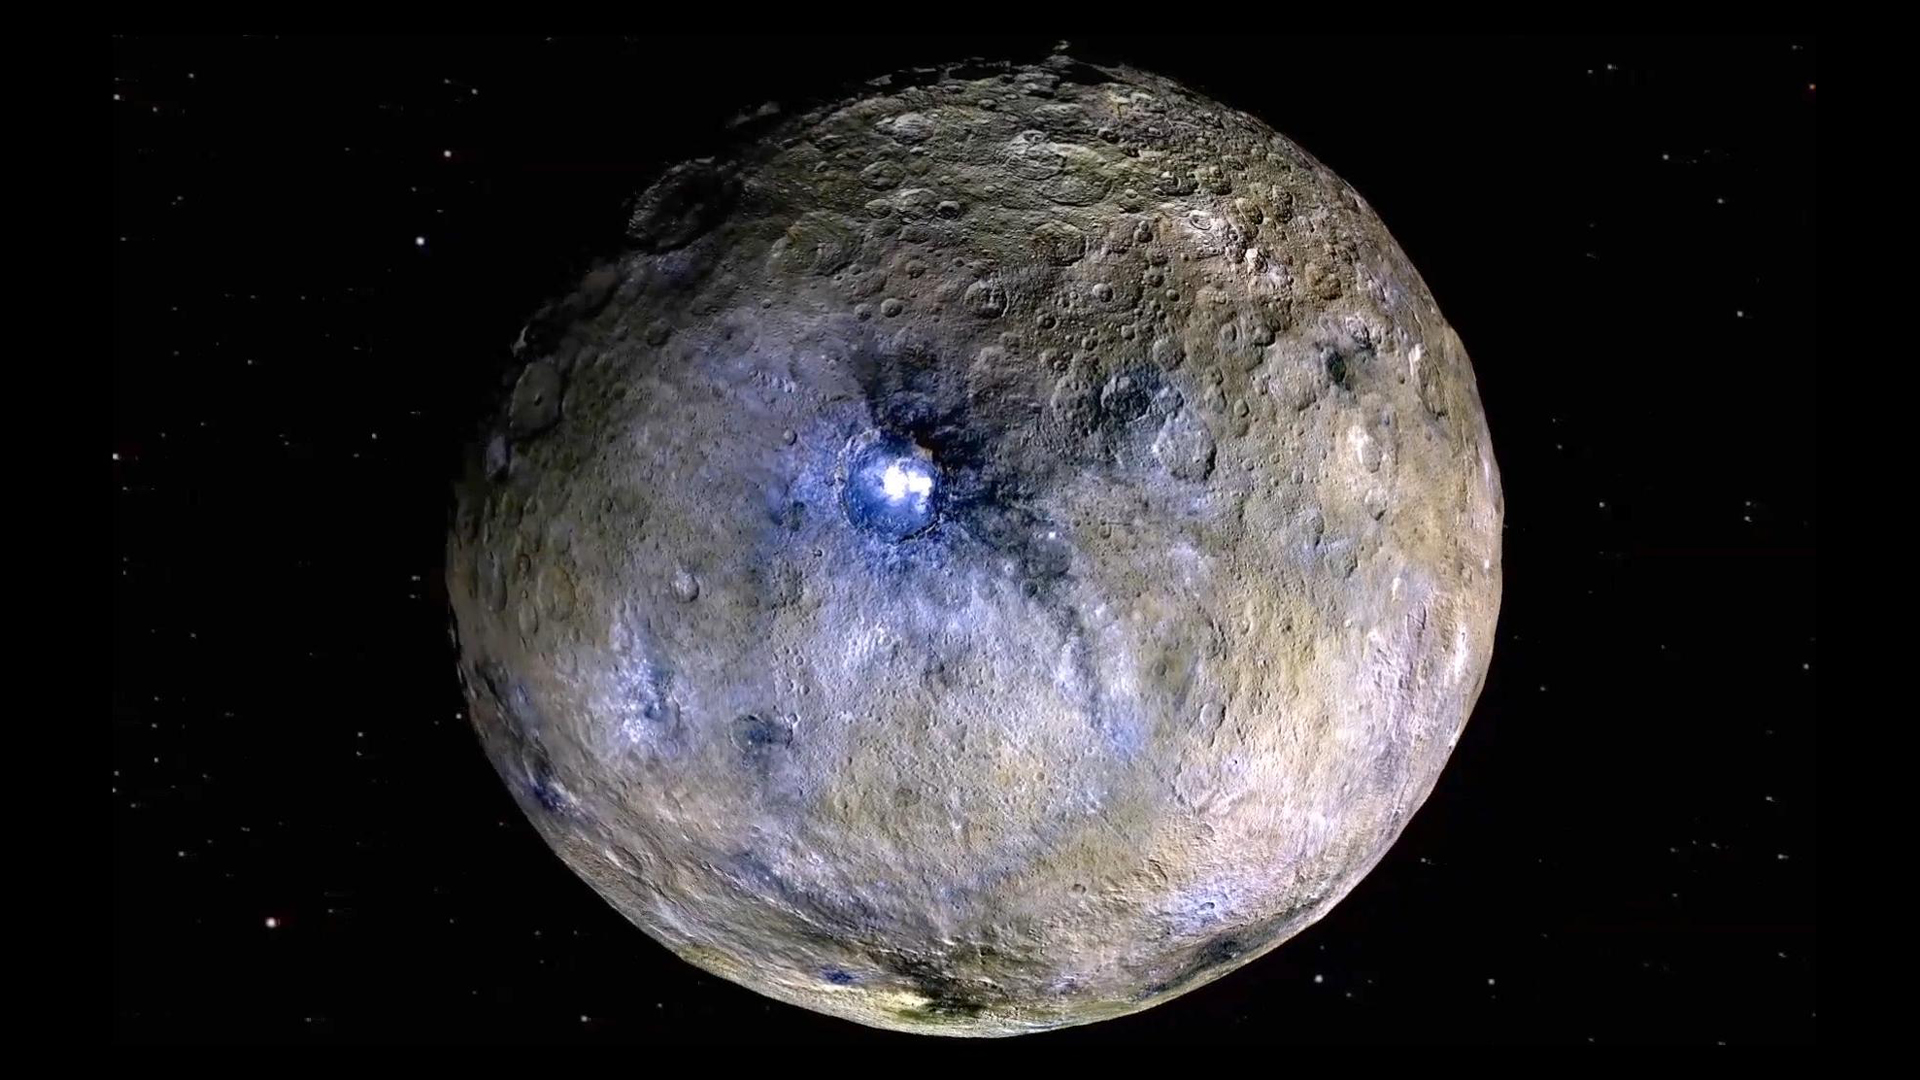 Ice in the craters of Ceres formed recently